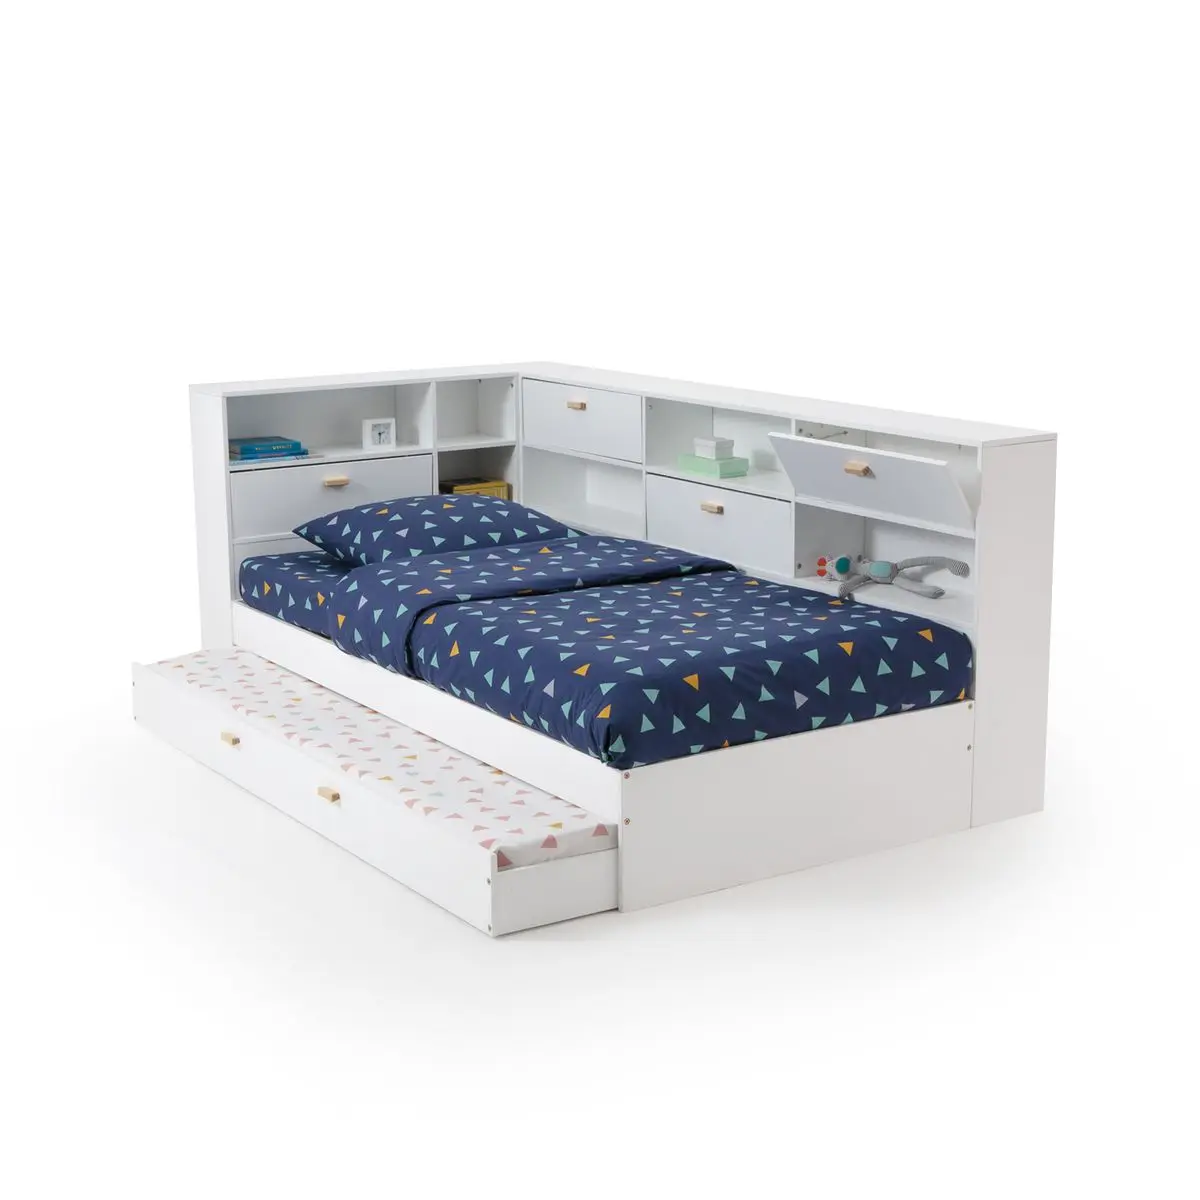 childrens double bed with storage